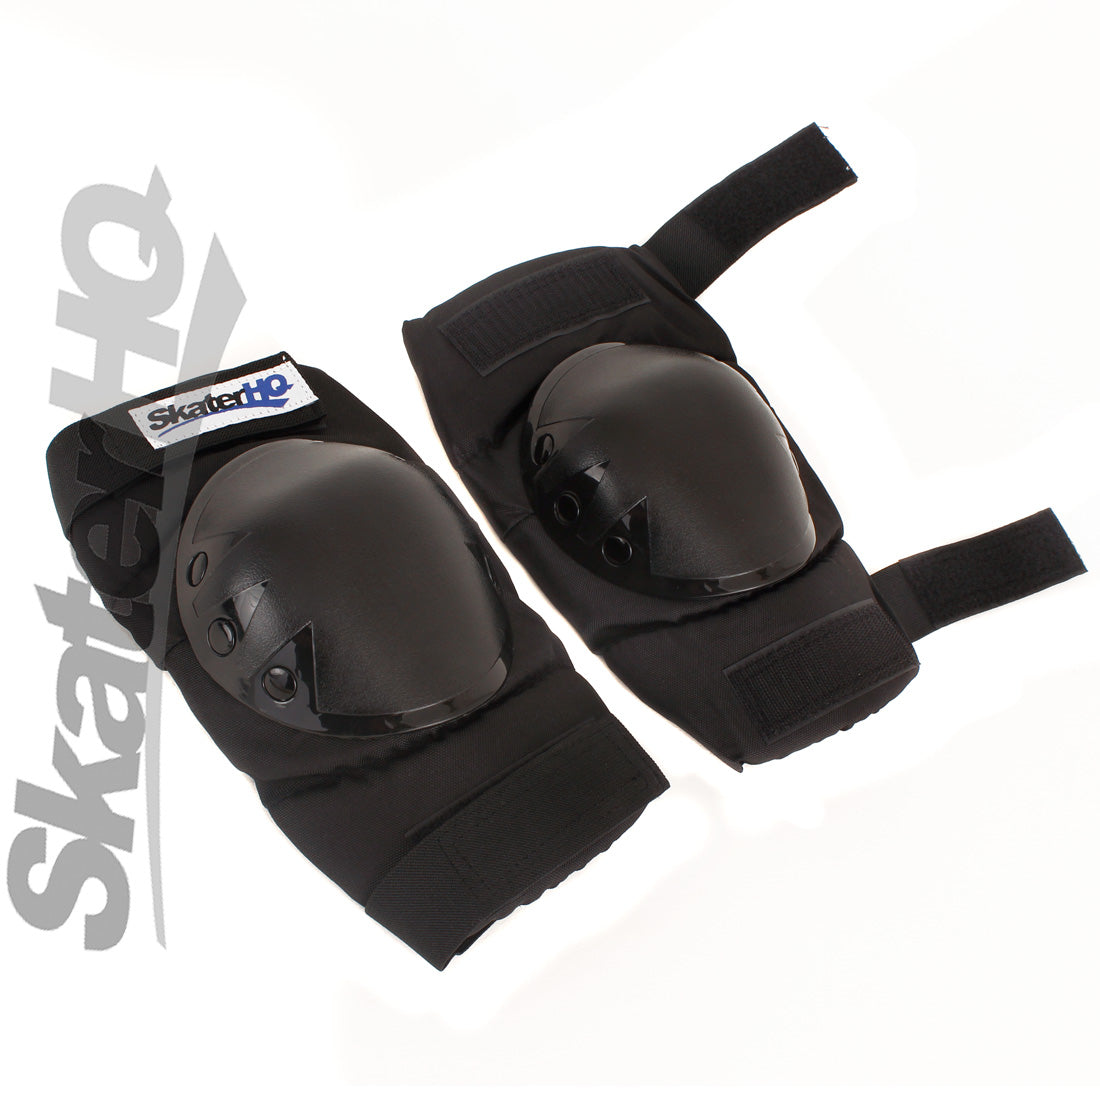 Skater HQ Tri Pack - Large Protective Gear